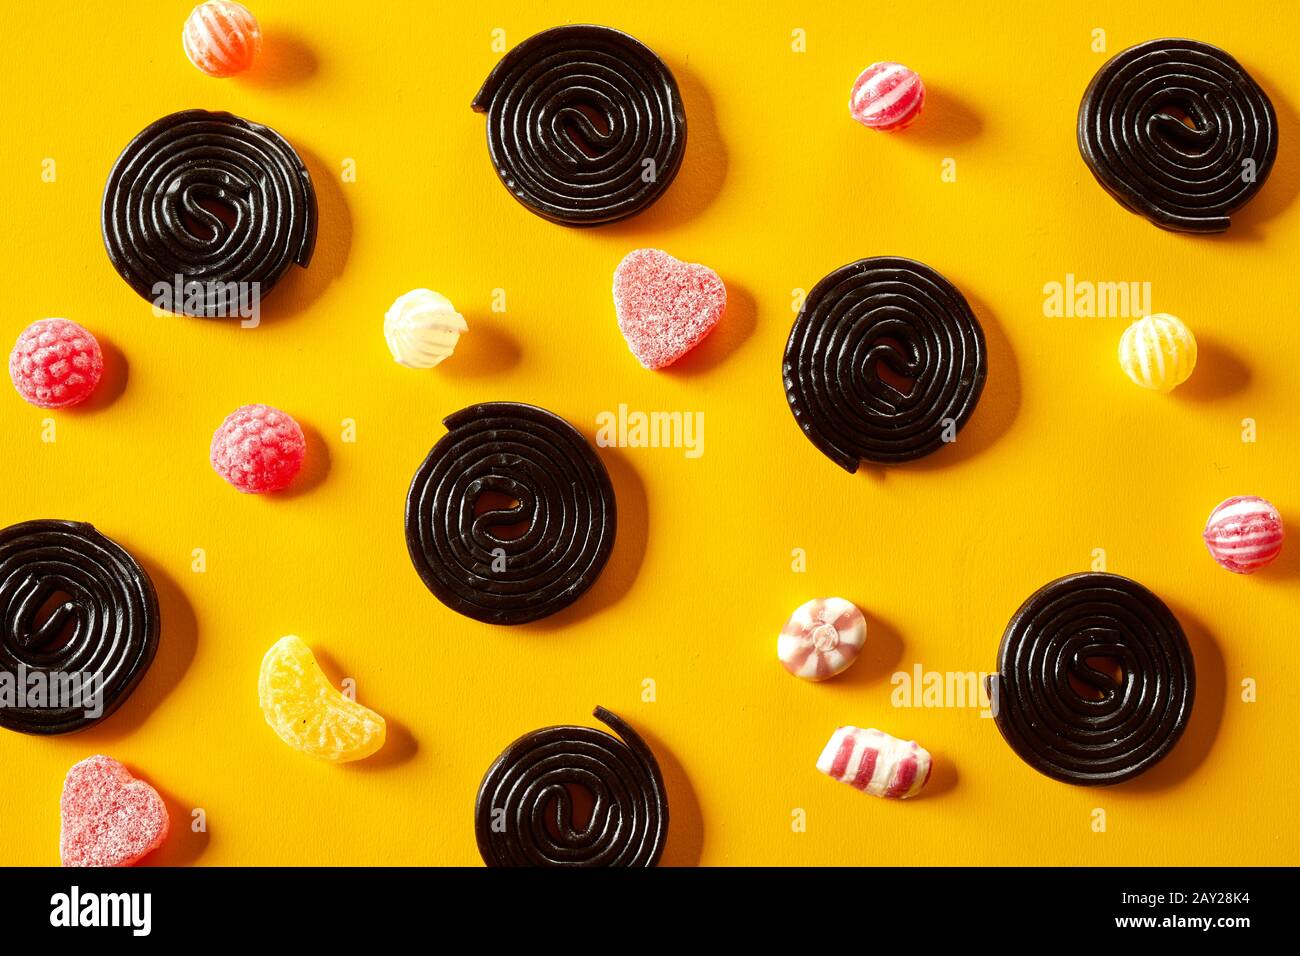 Spiral liquorice coils with fruity jub jub candy between scattered on a yellow background in a decorative pattern from overhead Stock Photo